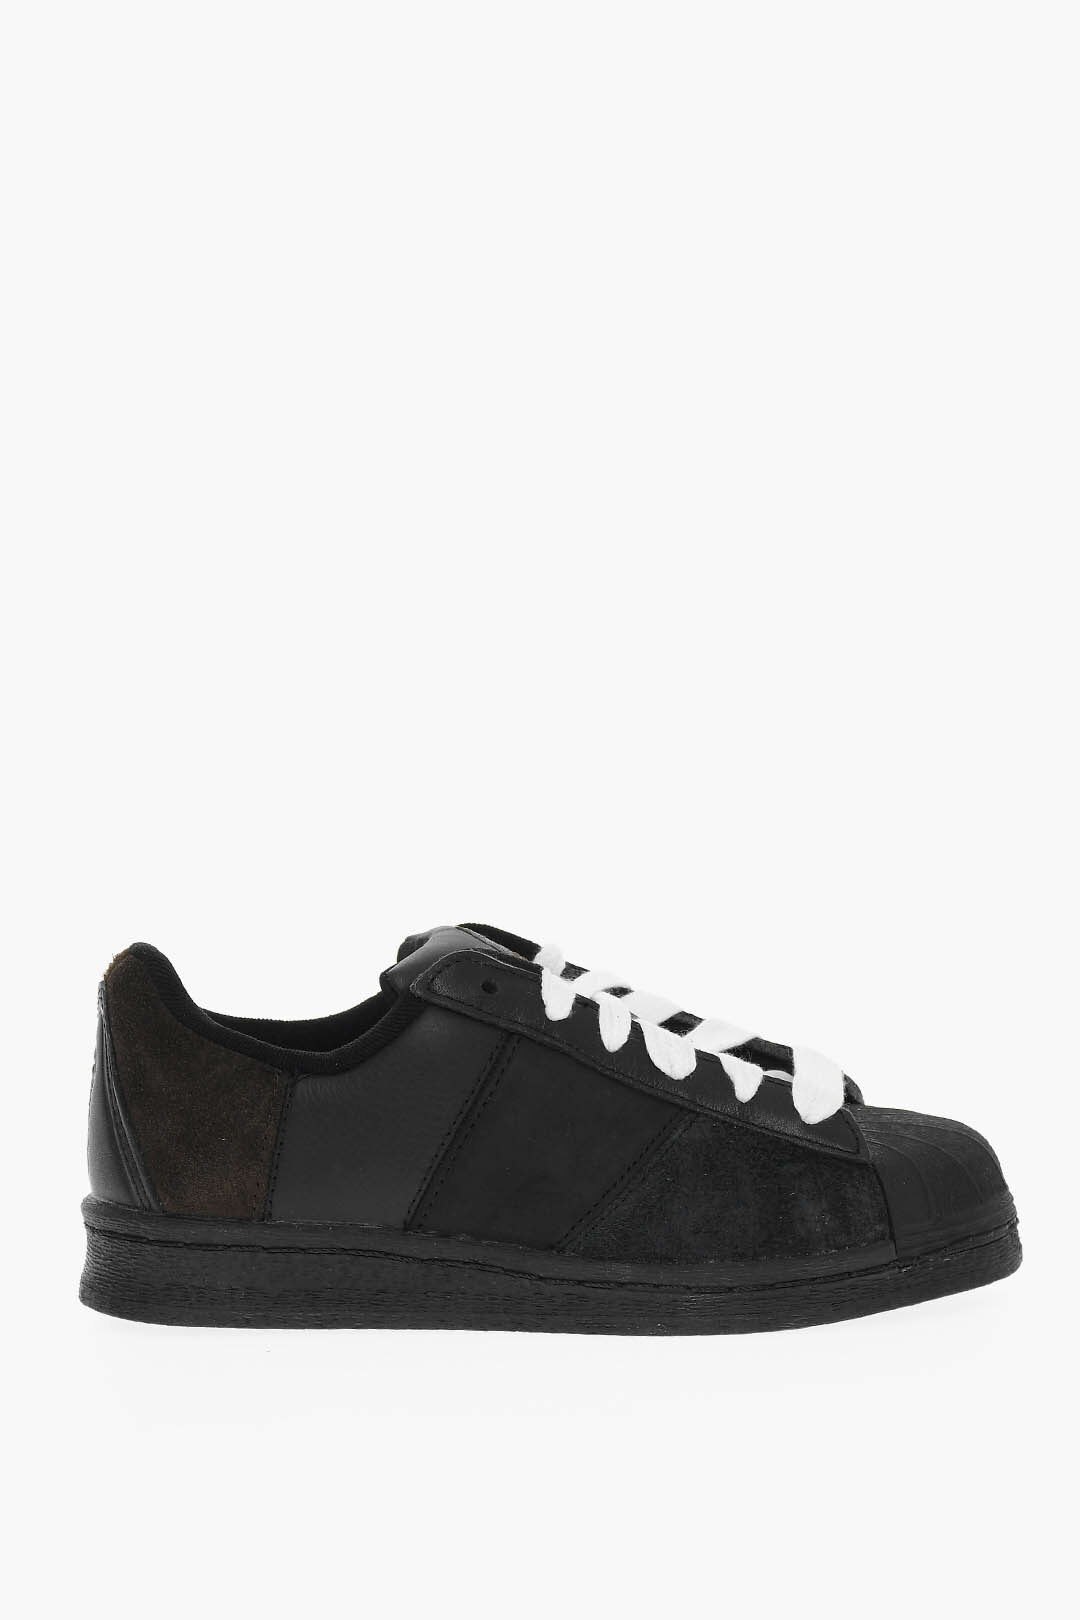 Adidas Leather SUPERSTAR 82 Low-Top Sneakers men - Glamood Outlet